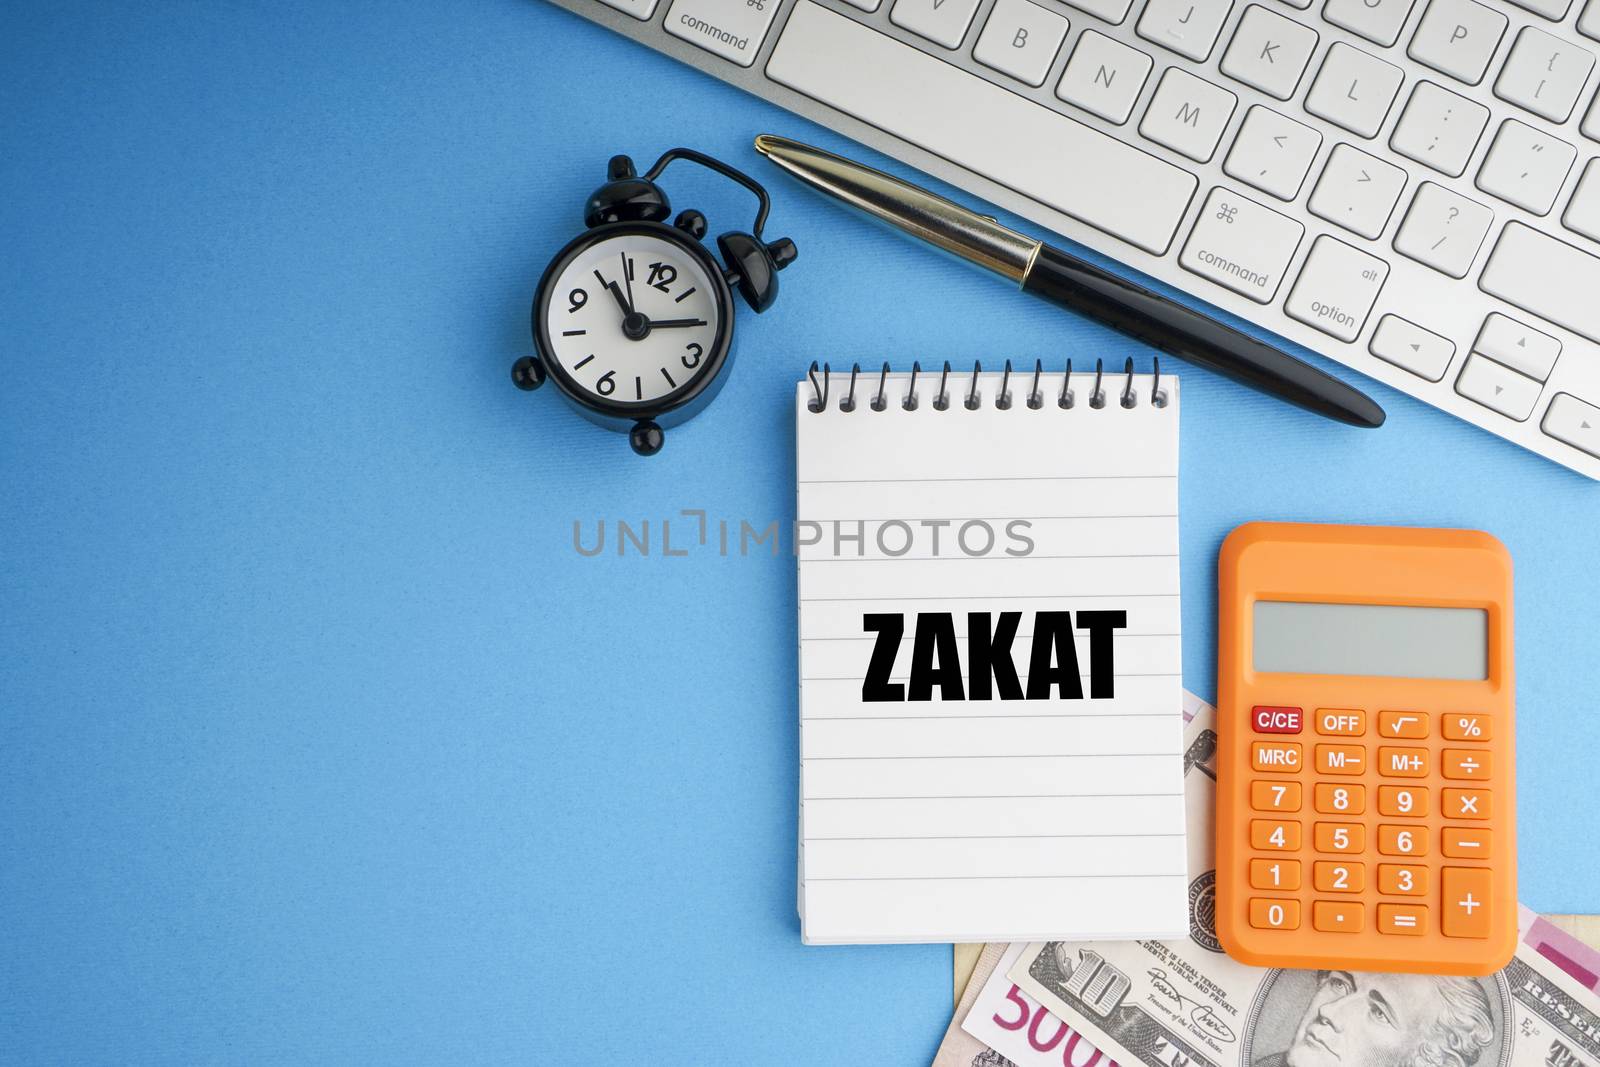 ZAKAT or Islamic Tax on wealth text with fountain pen, notepad, banknotes currency and keyboard on blue background by silverwings